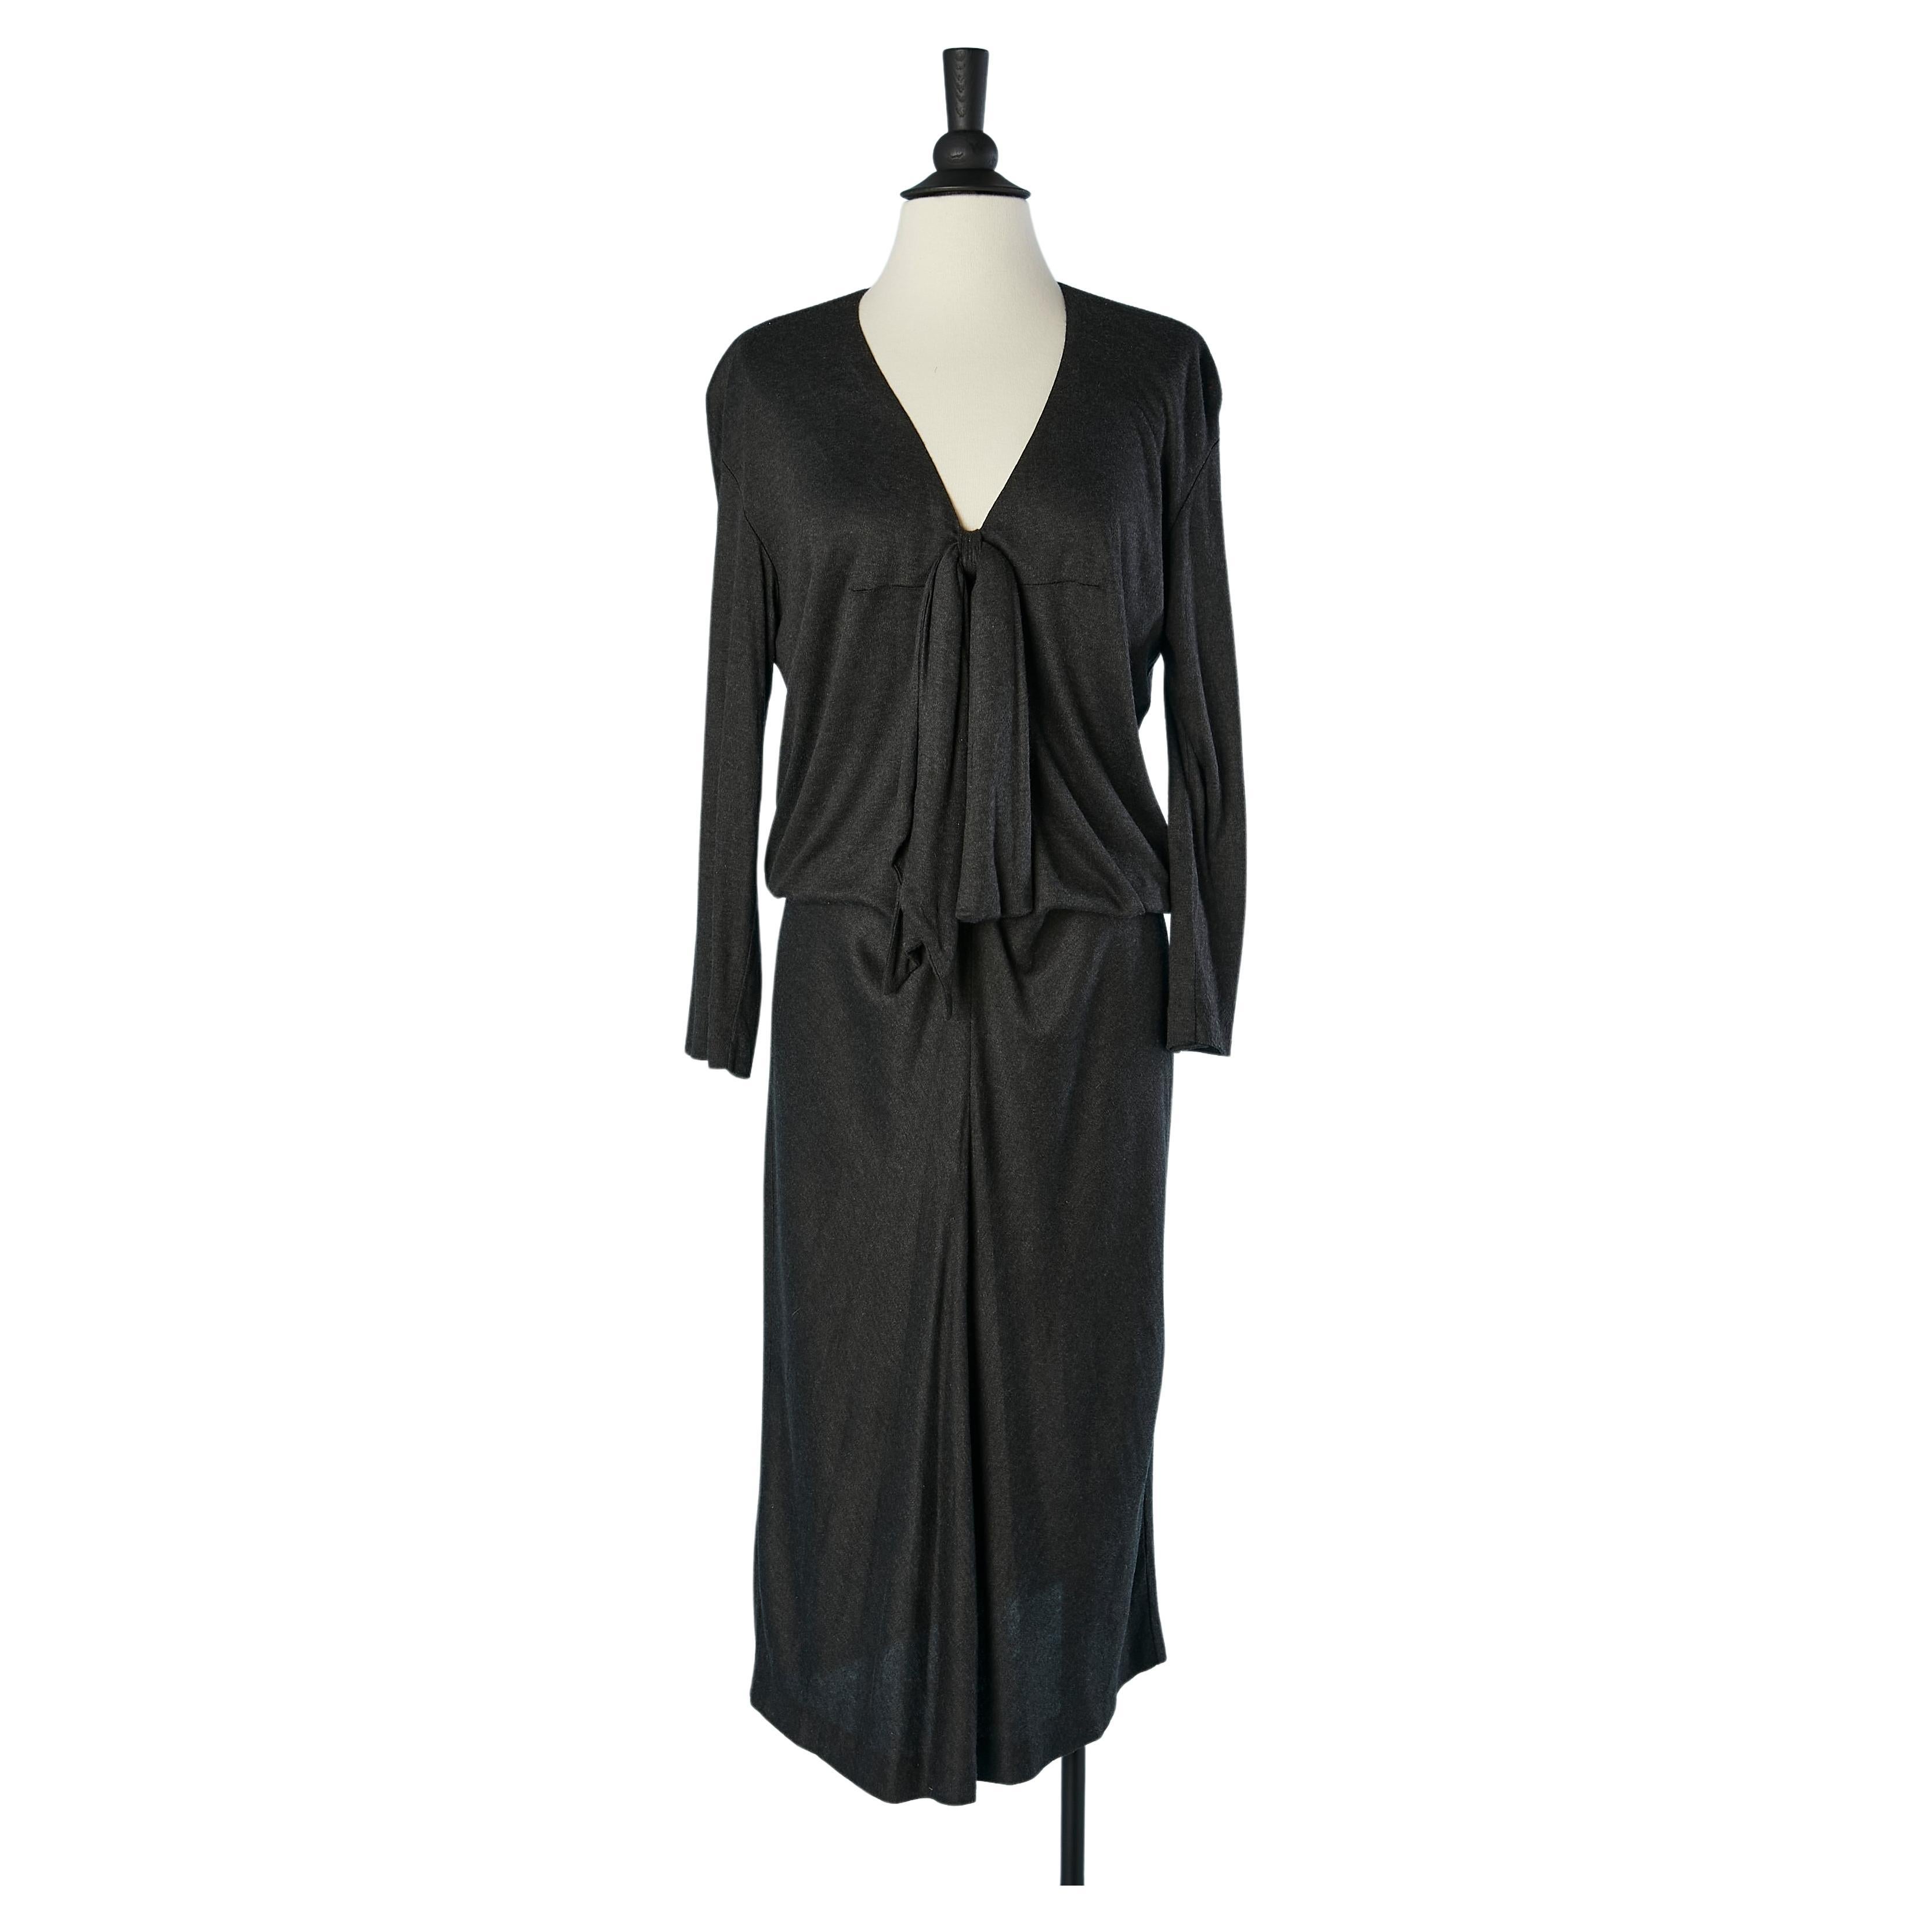 Anthracite drape jersey dress with bow in the middle front Yves Saint Laurent  For Sale